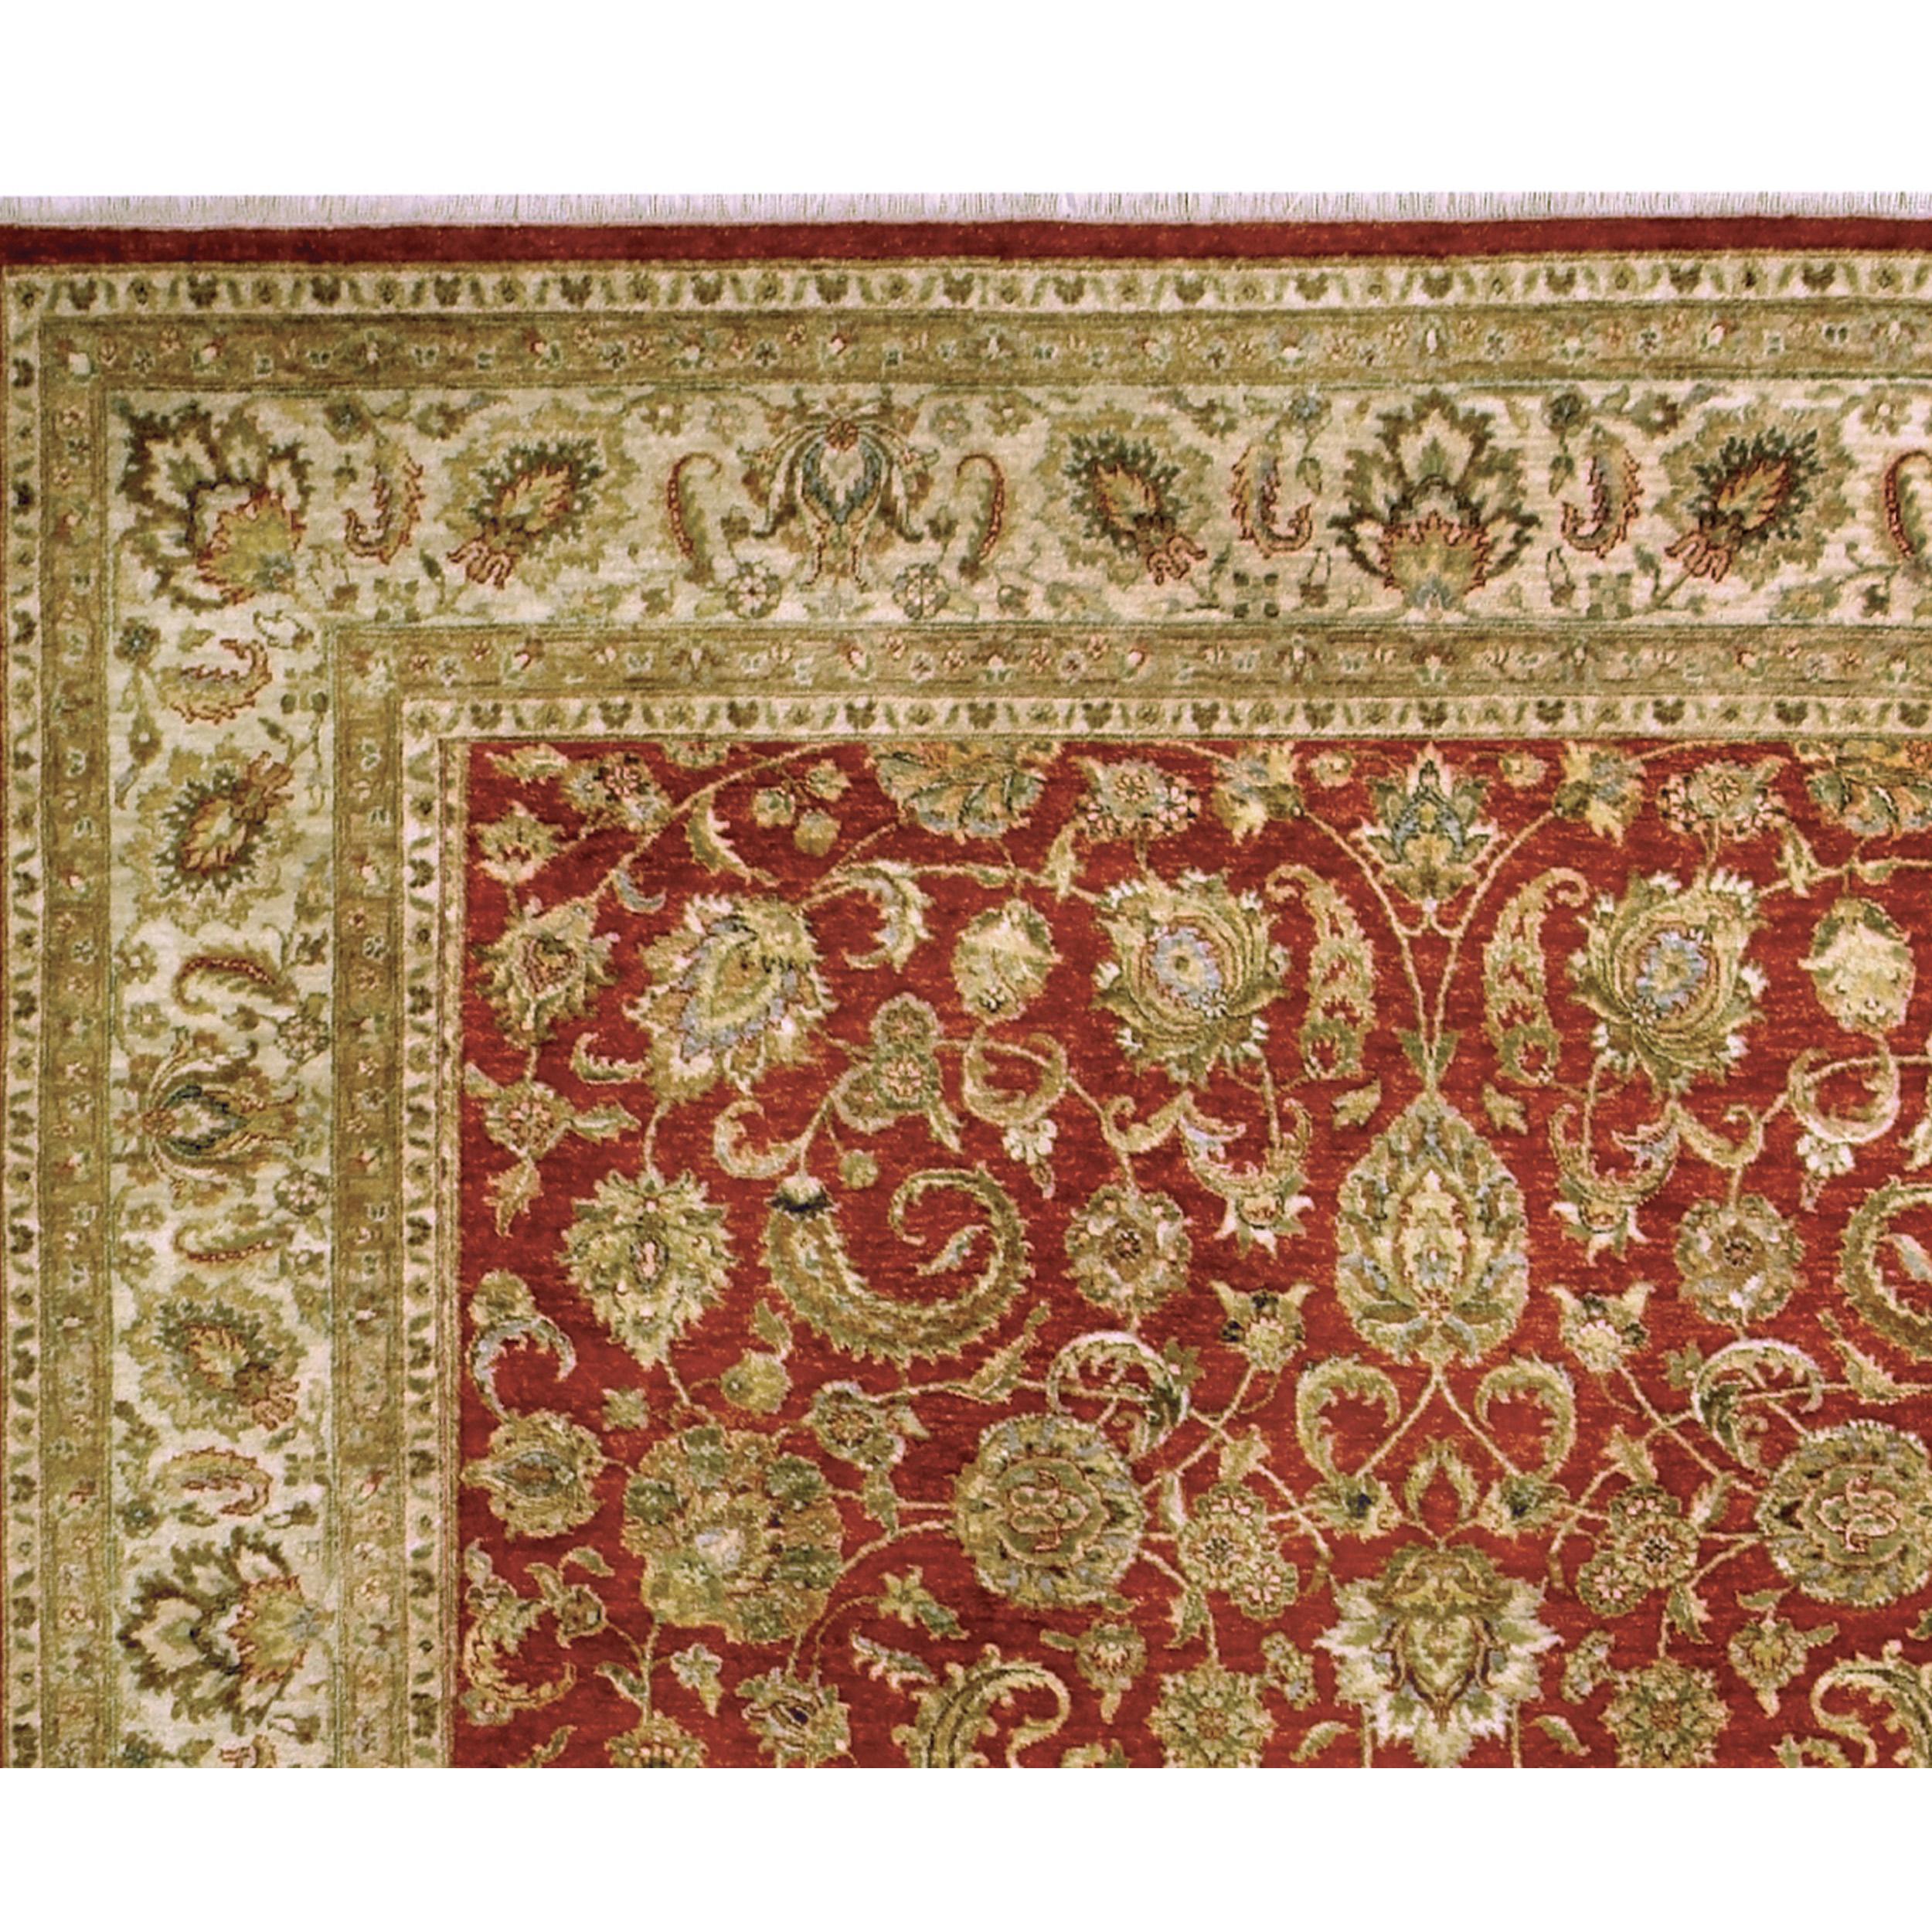 Meticulously crafted, this rug employs the most intricate traditional weaving techniques in India, guided by the expertise of skilled artisans. Each rug is a labor of love, with handweavers dedicating countless hours to knot-by-knot, bringing the